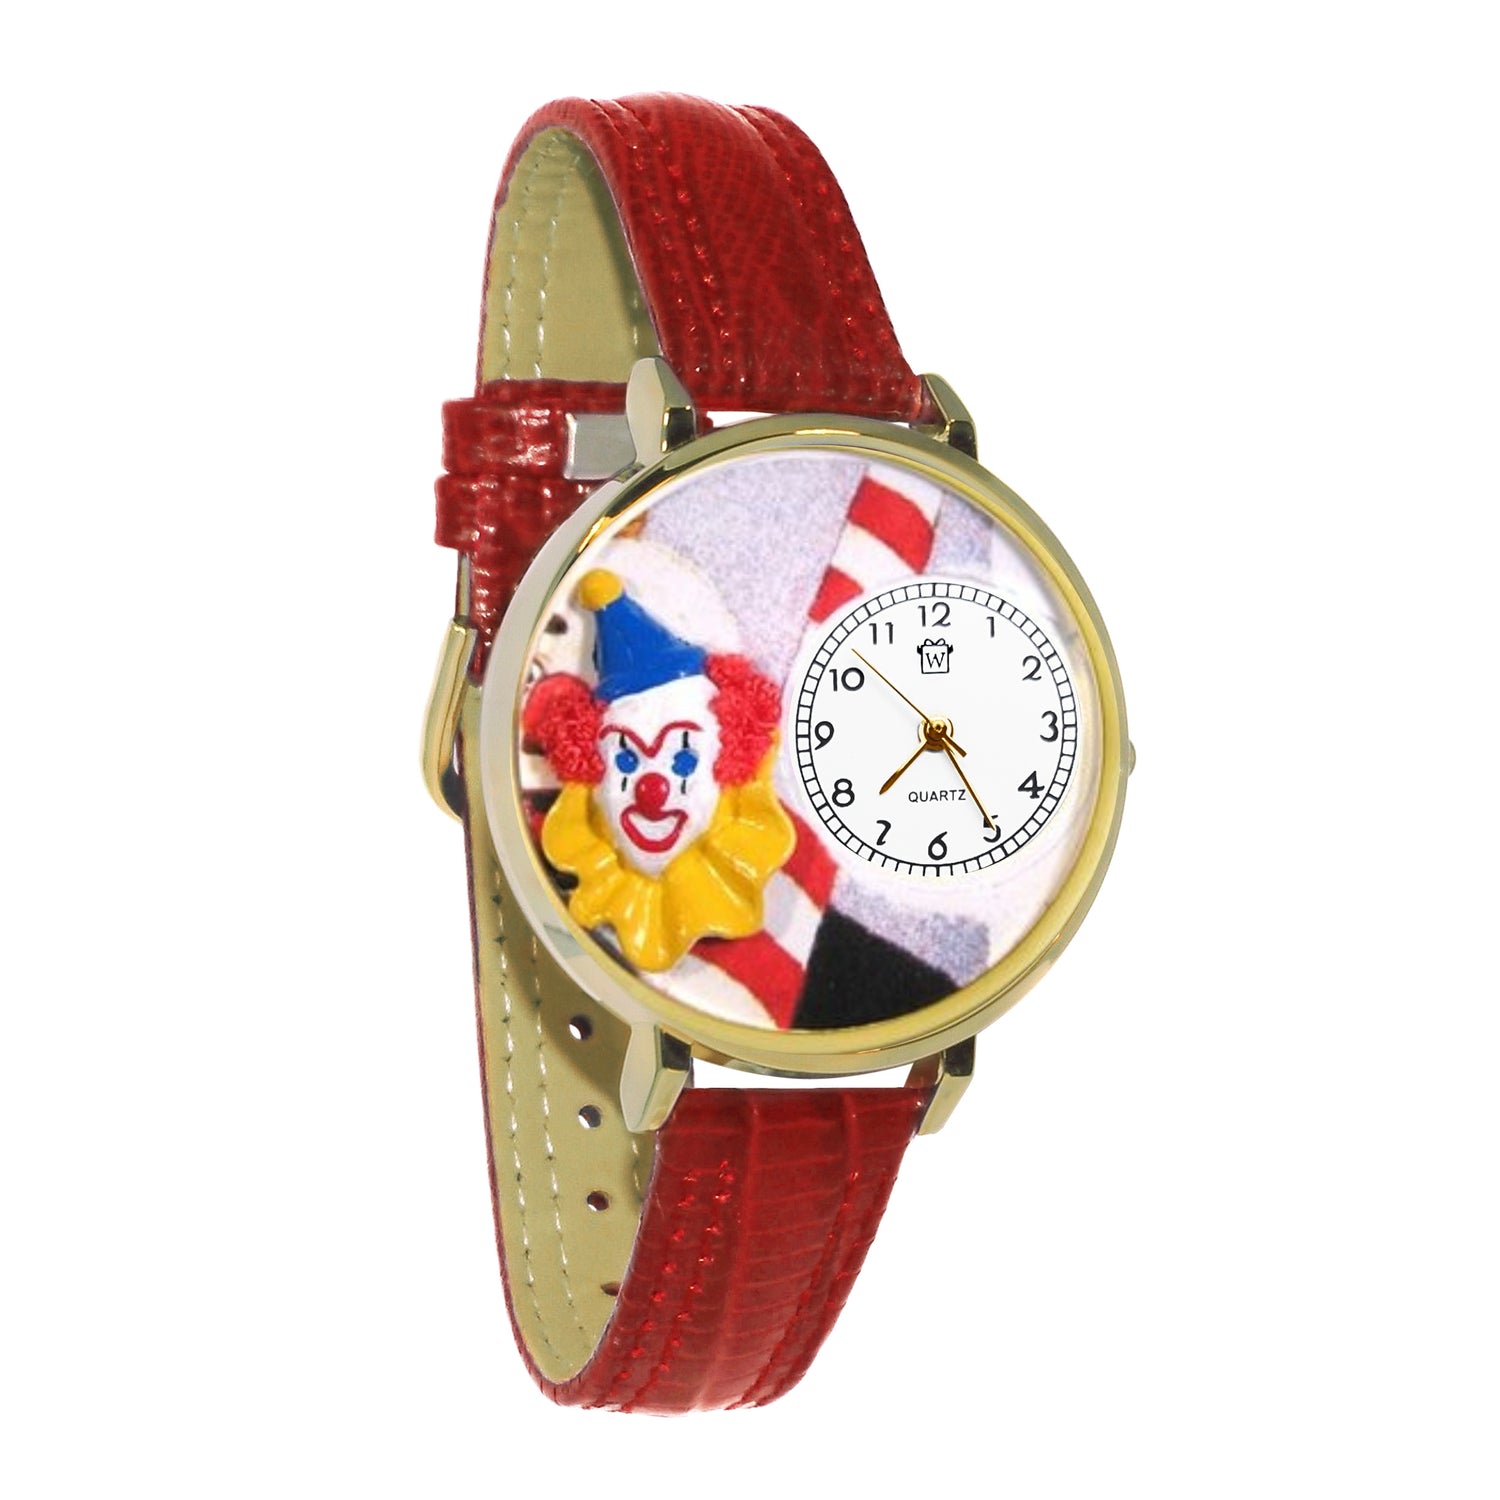 Whimsical Gifts | Penny Clown 3D Watch Large Style | Handmade in USA | Youth Themed |  | Novelty Unique Fun Miniatures Gift | Gold Finish Red Leather Watch Band